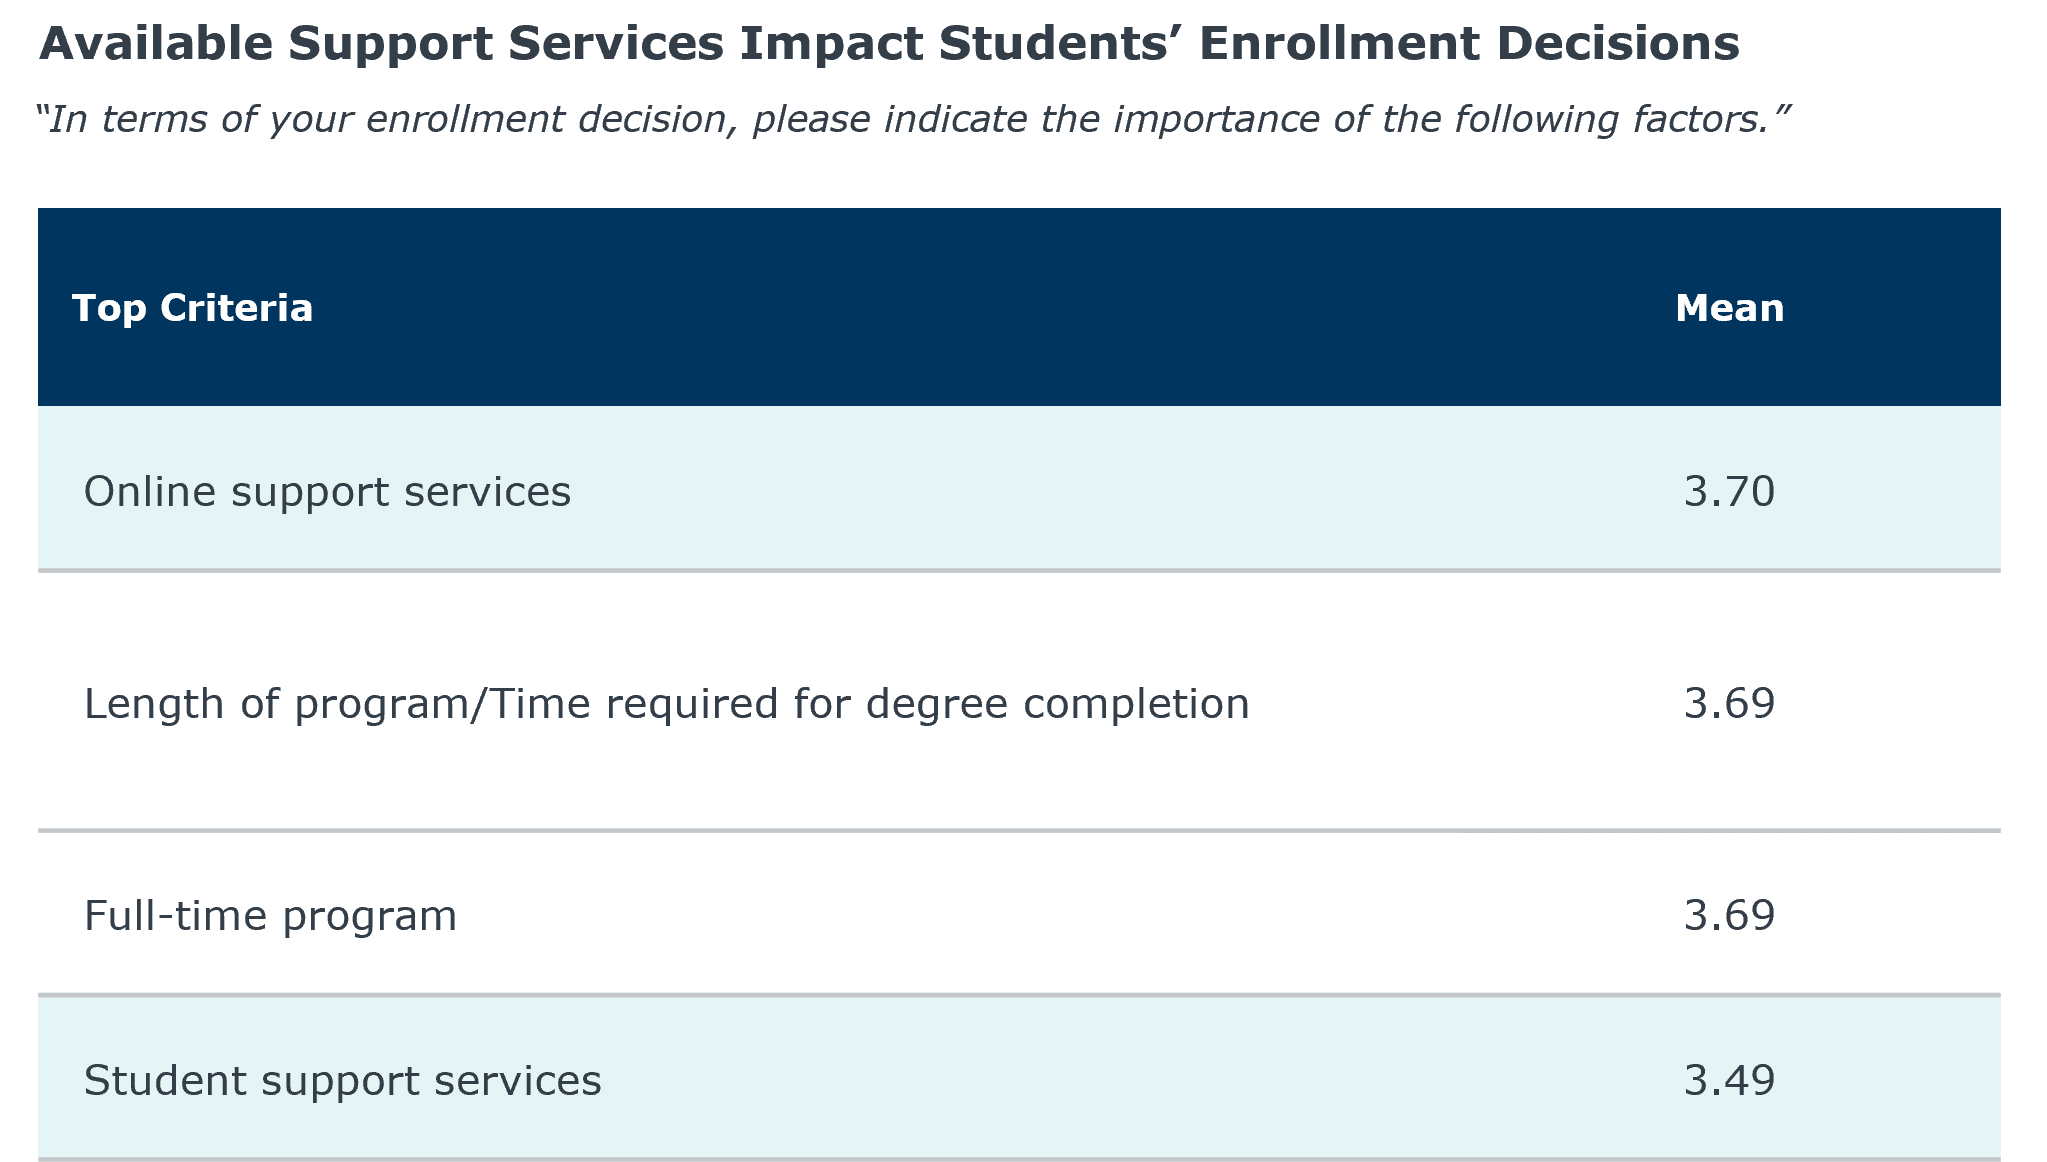 Chart: Available support services impact students' enrollment decisions